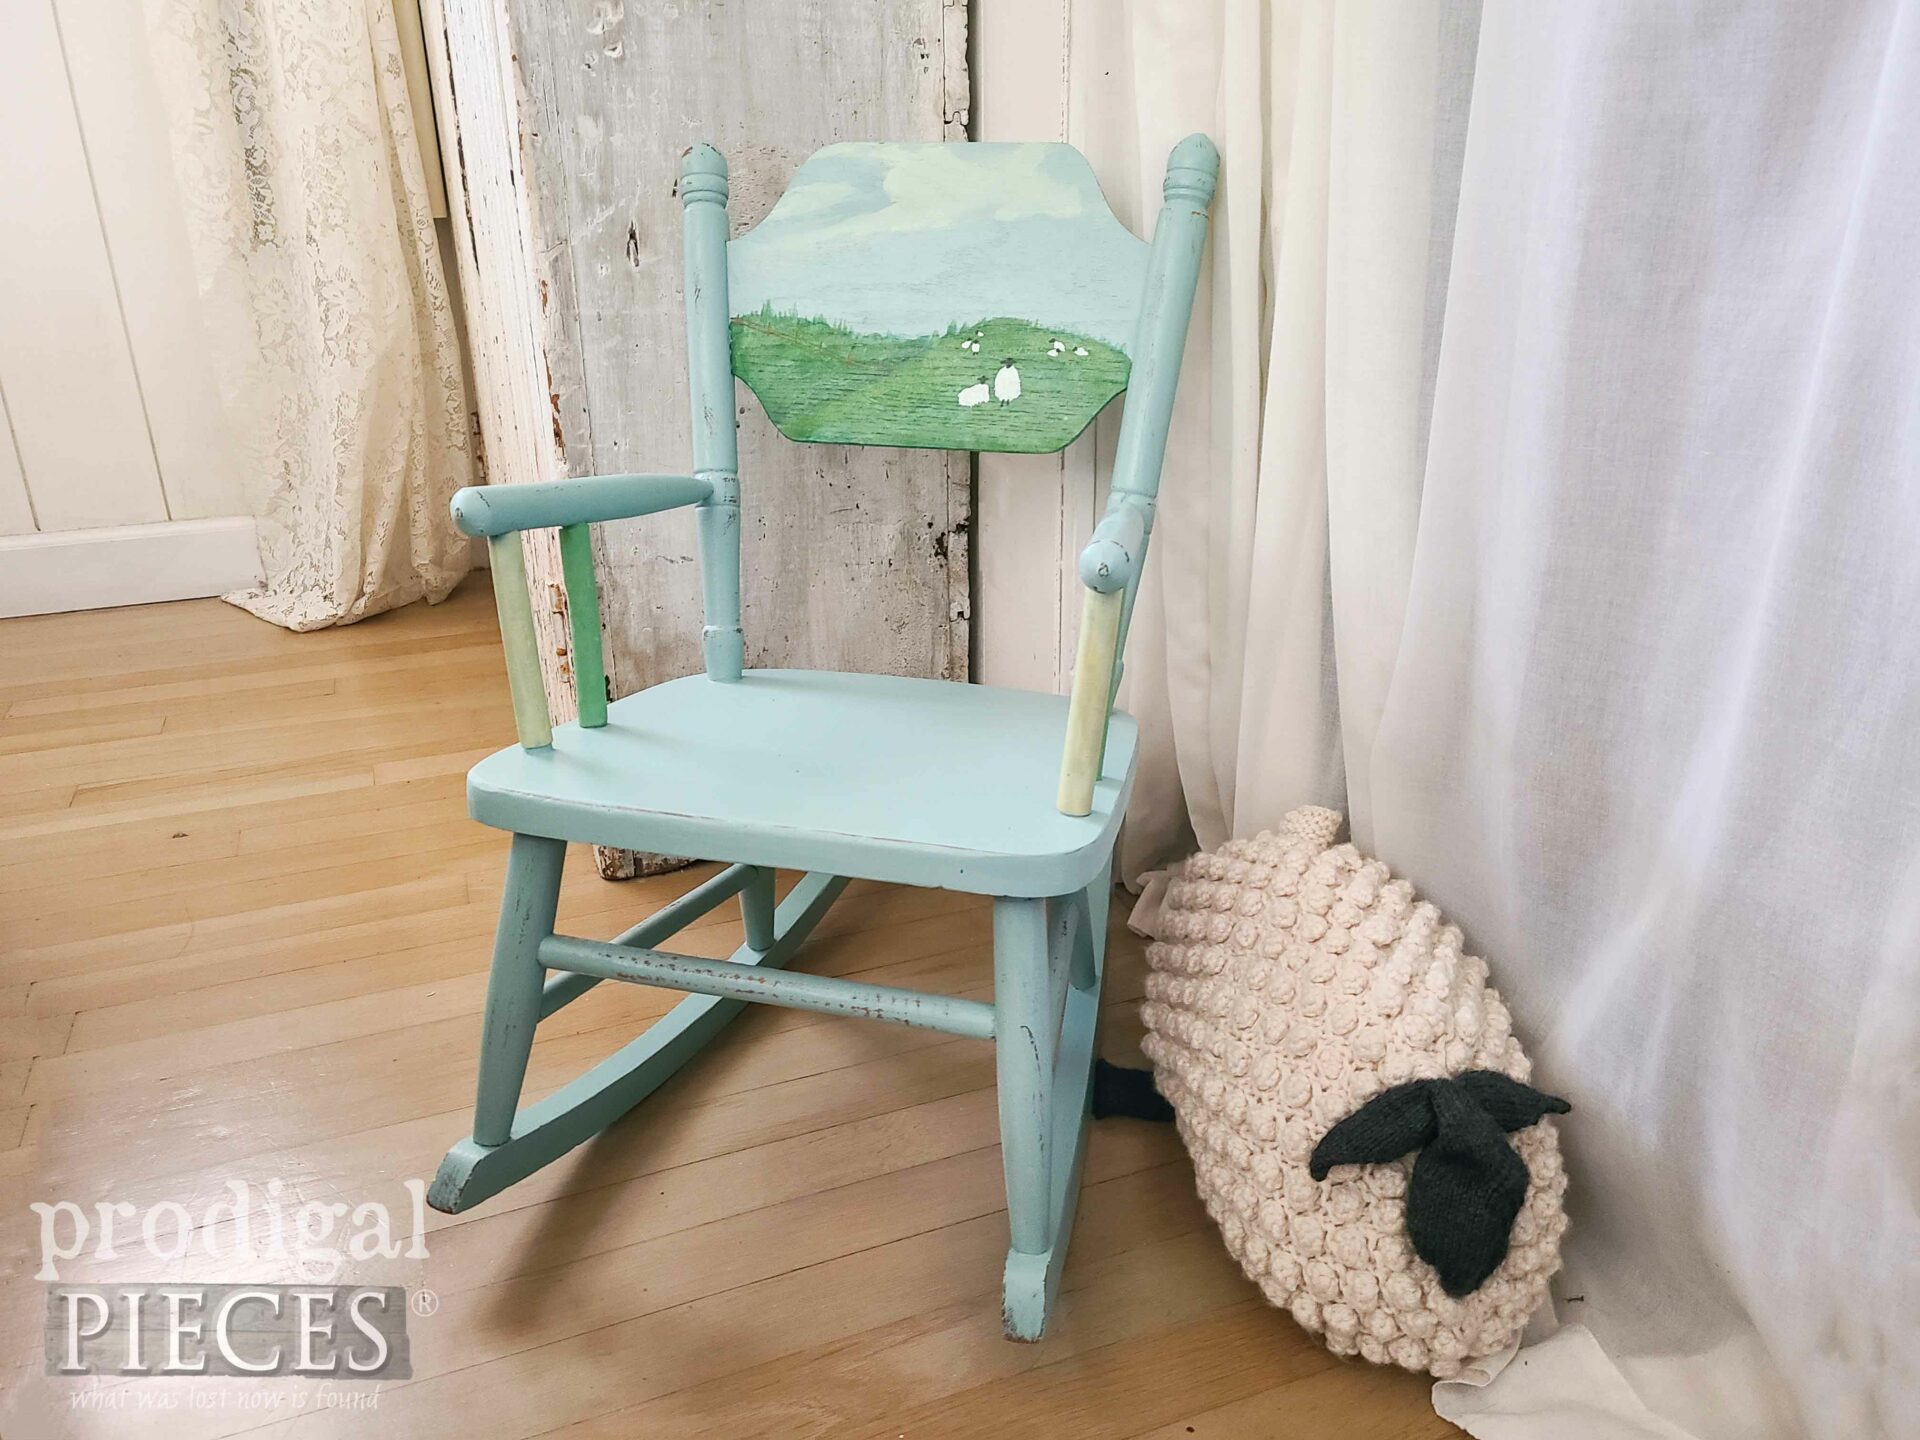 Vintage Mini Rocking Chair in Farmhouse Style by Larissa of Prodigal Pieces | prodigalpieces.com #prodigalpieces #furniture #vintage #farmhouse